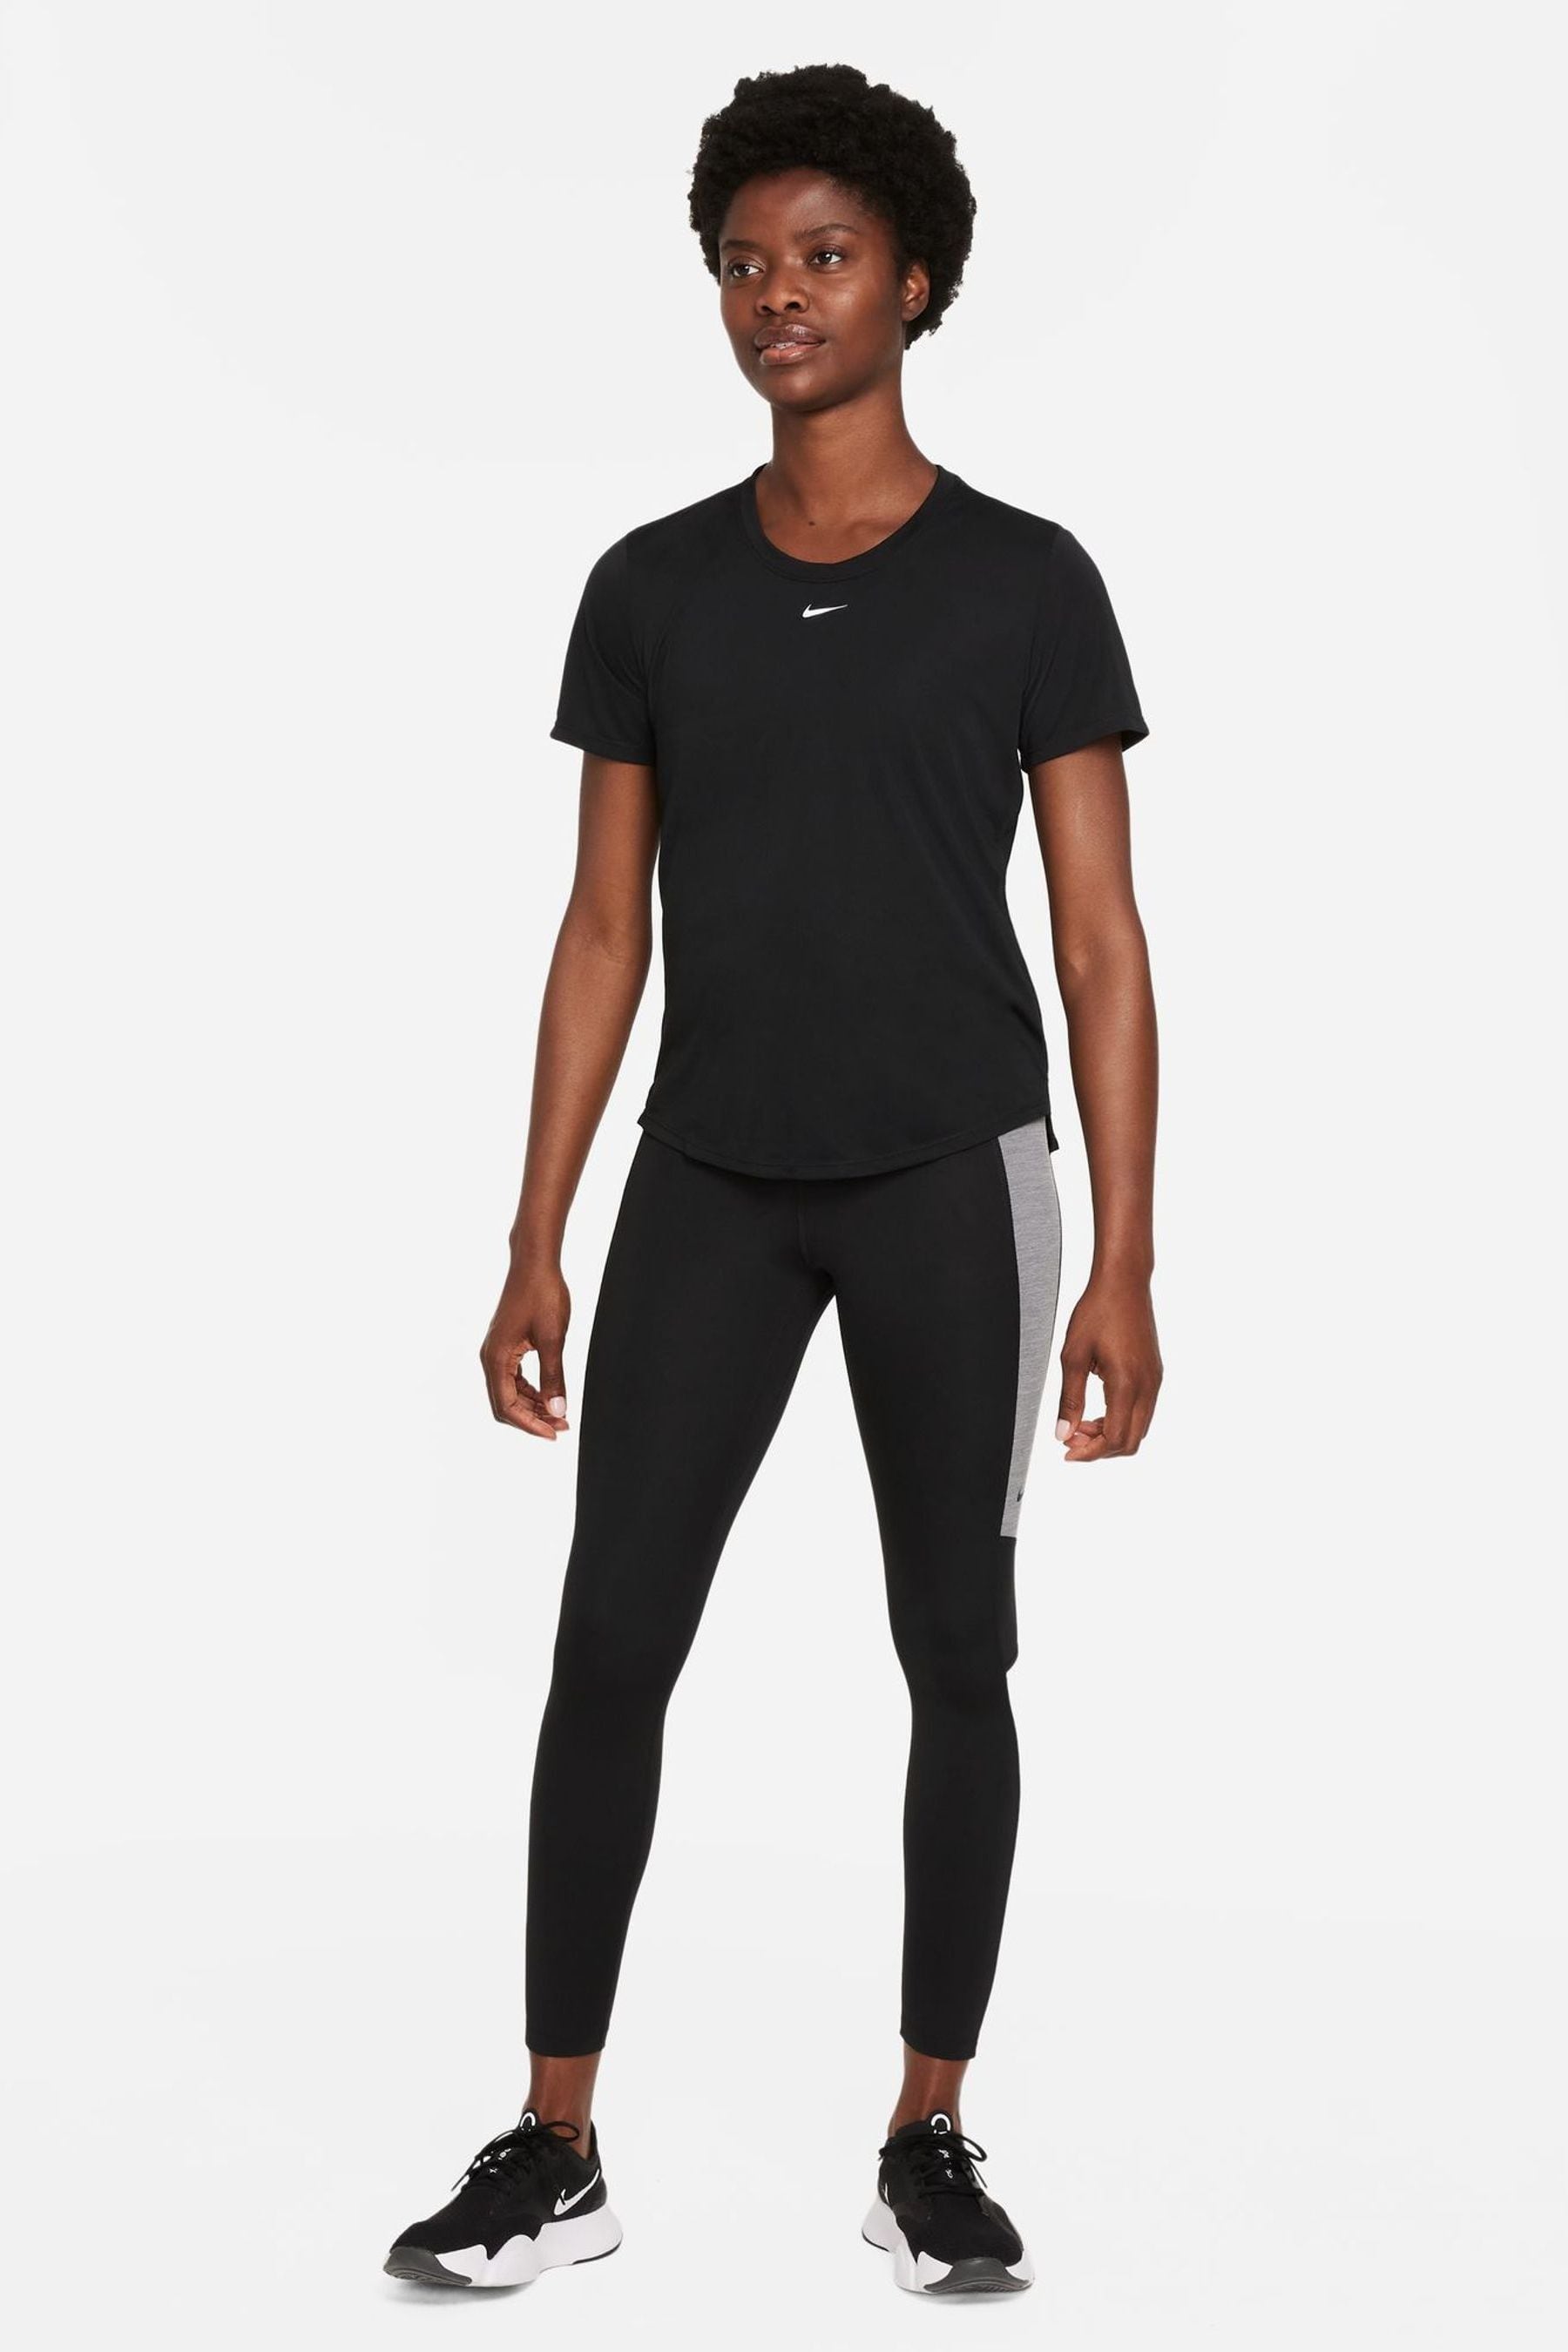 Buy Nike Black One Training Top from the Next UK online shop